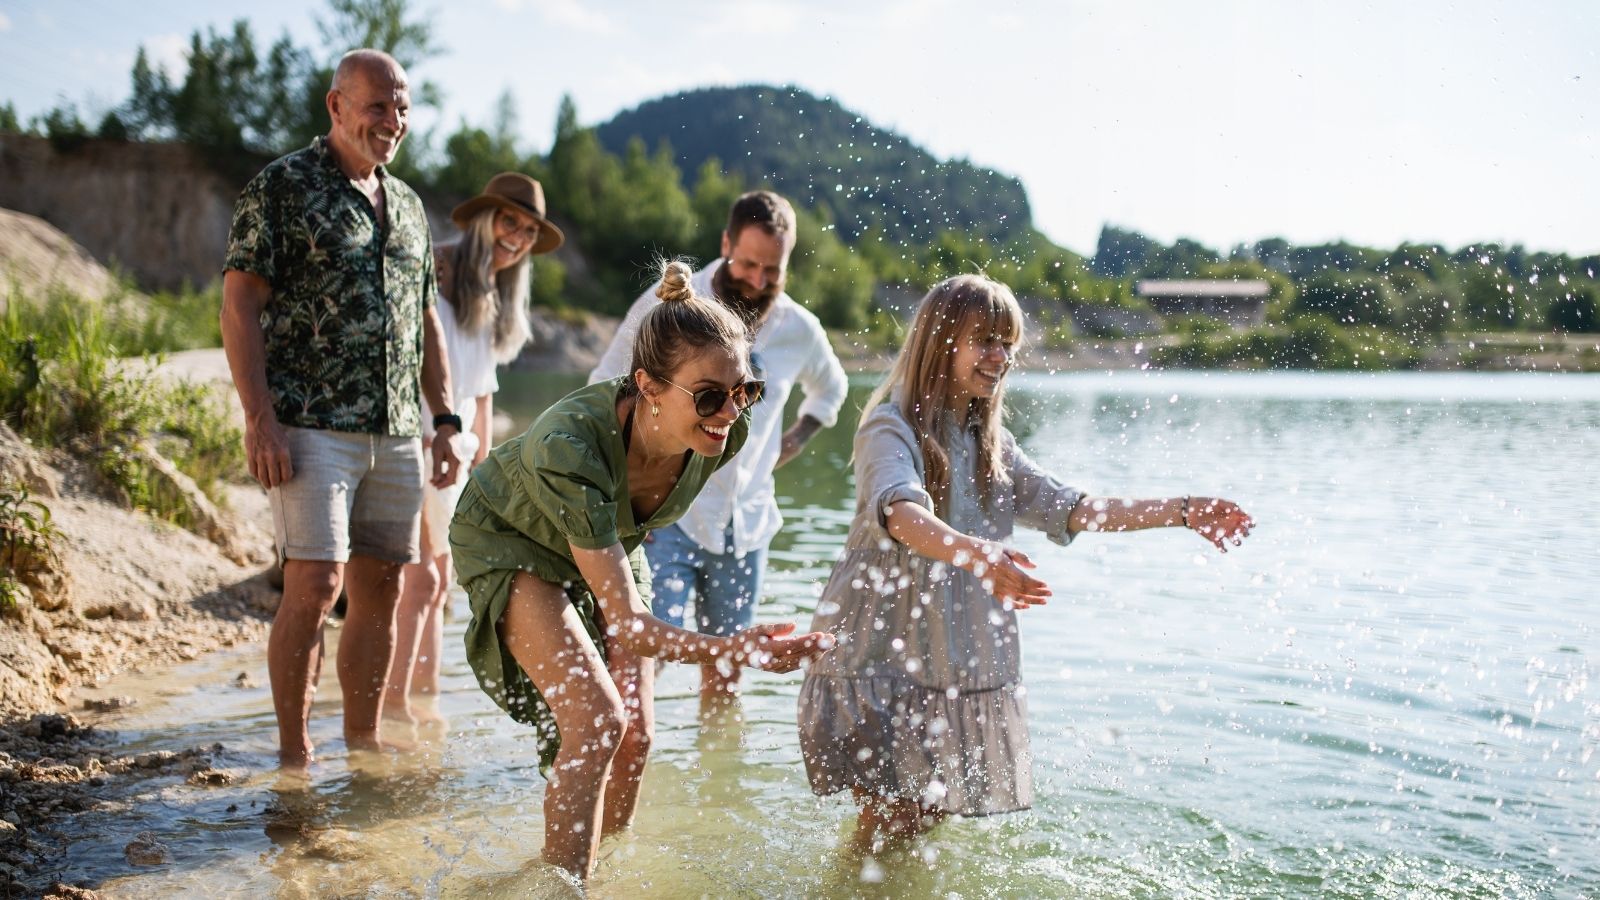 13 Best Resorts for Multigenerational Family Vacations (13